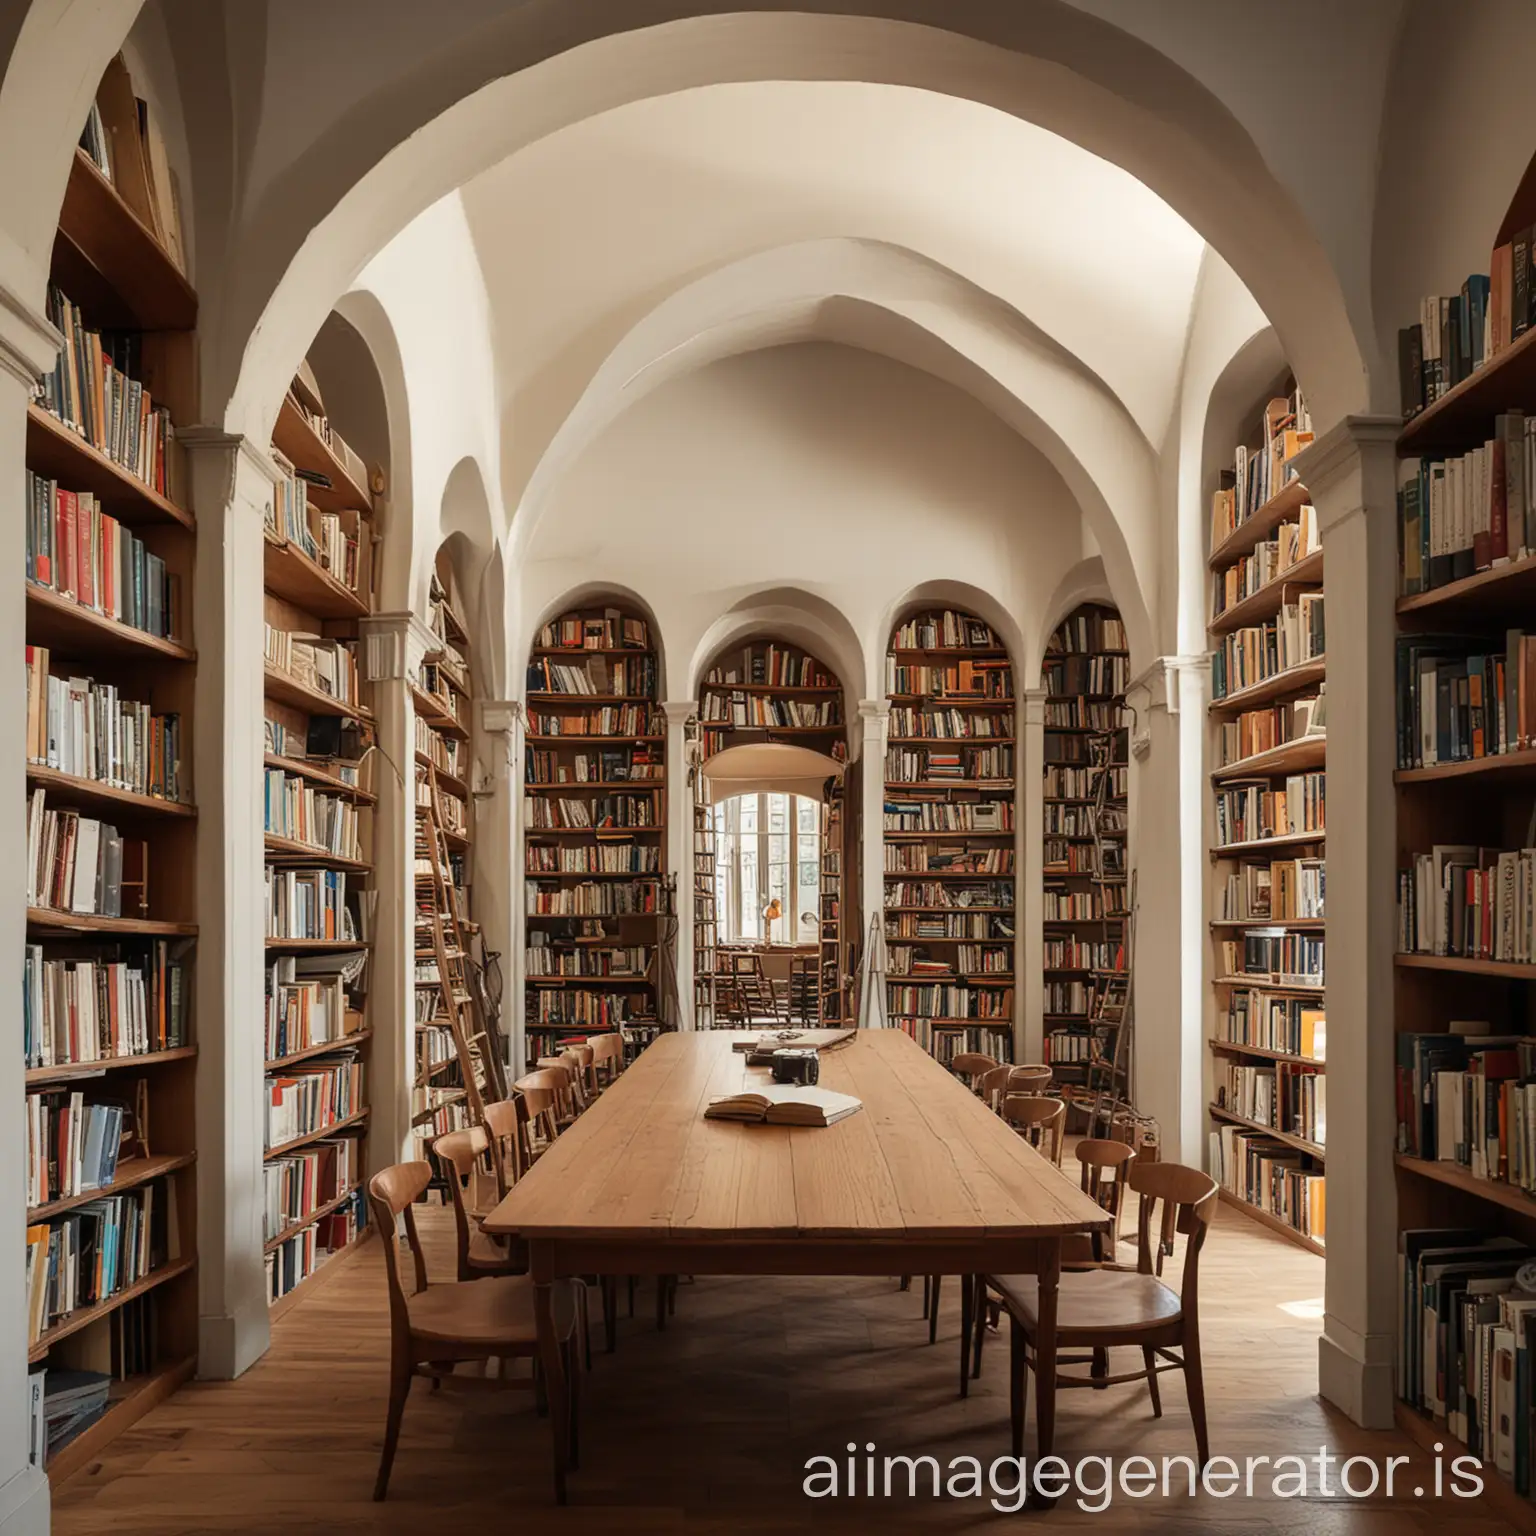 Vast-Library-with-Towering-Shelves-and-Grand-Arch